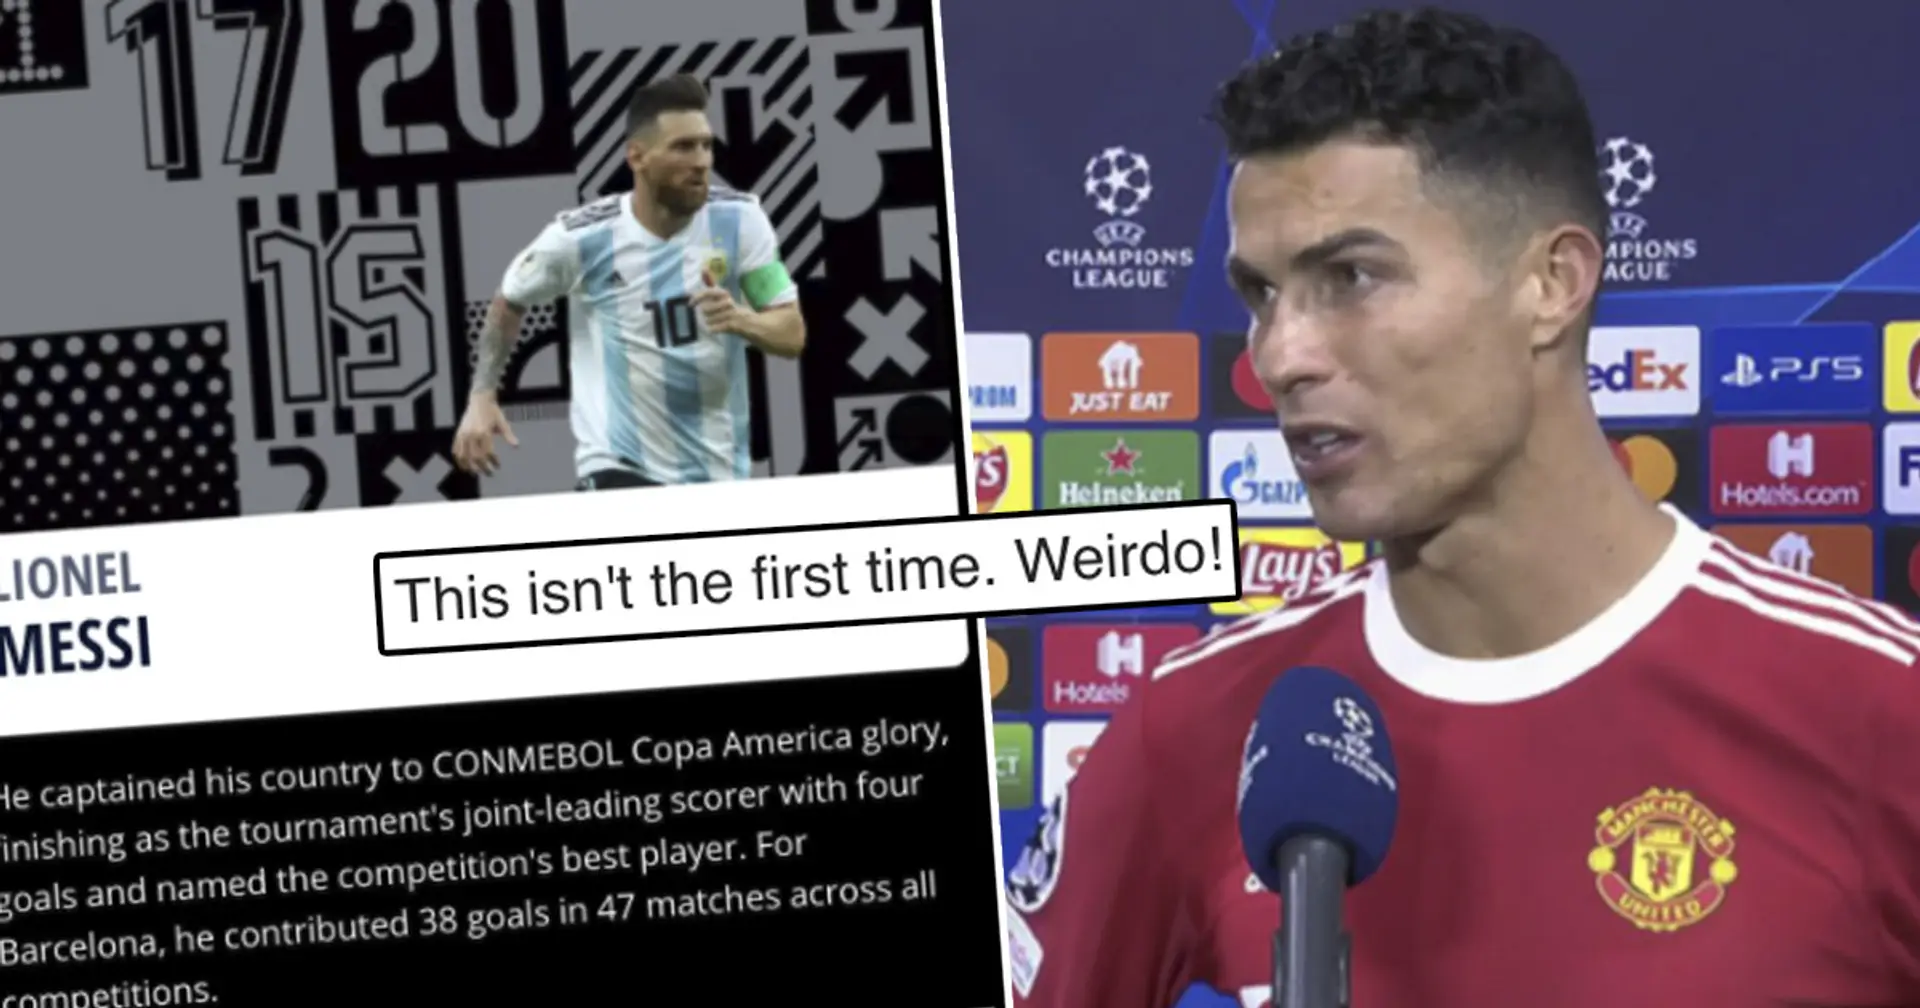 'The editor is a Ronaldo fan': Cule spots one weird thing about Messi stats on FIFA website